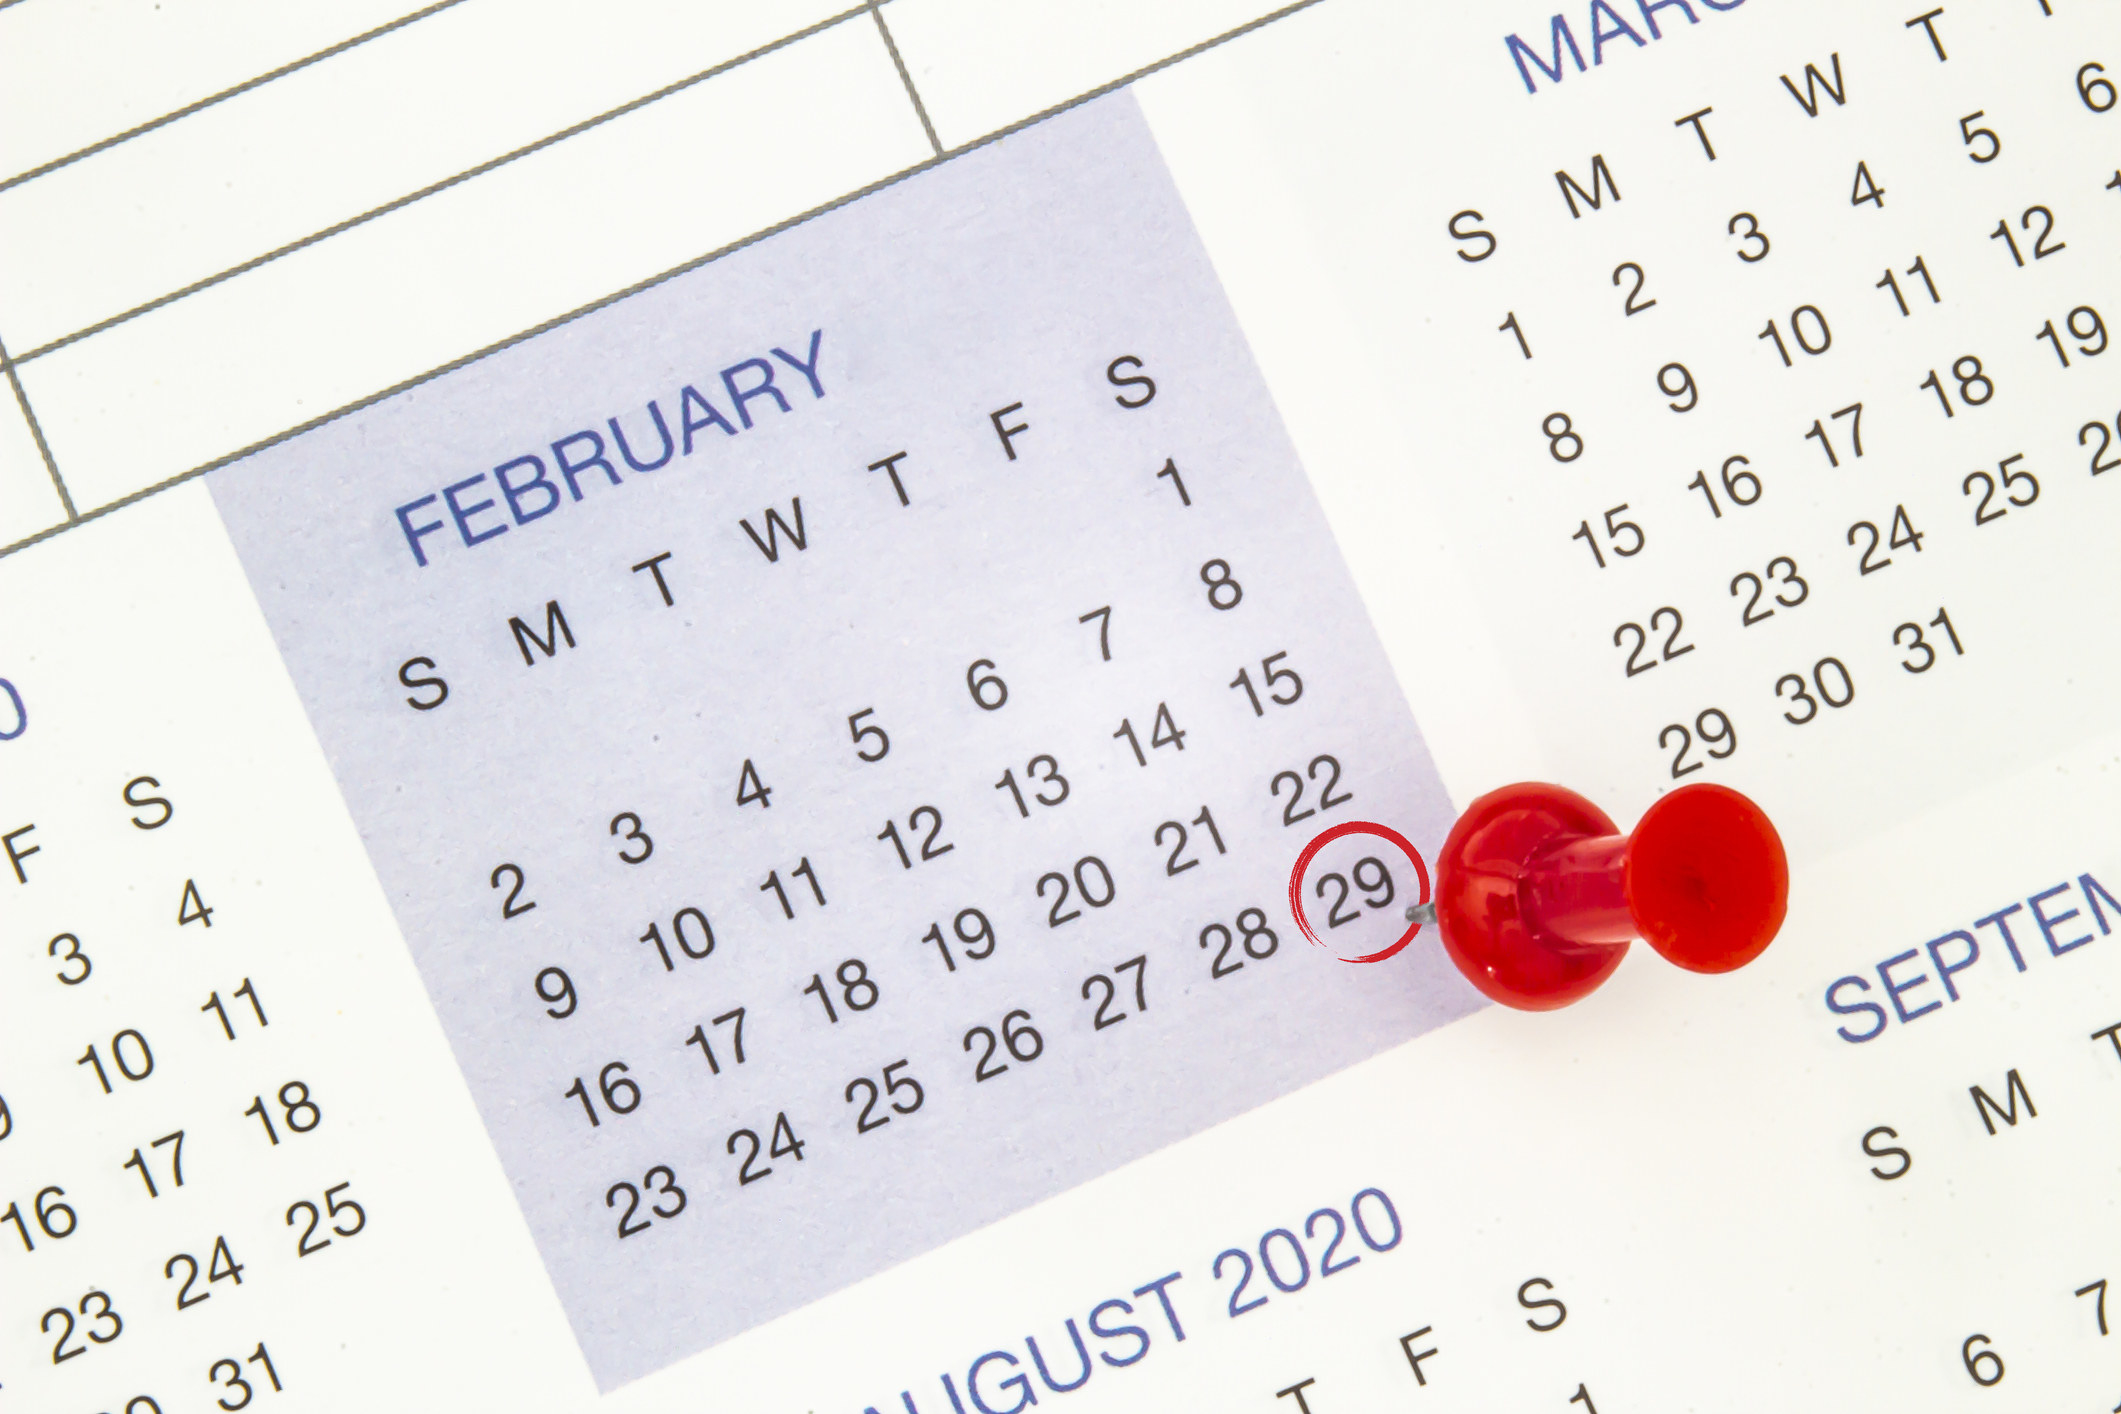 A calendar on February 29 on a leap year, leap day